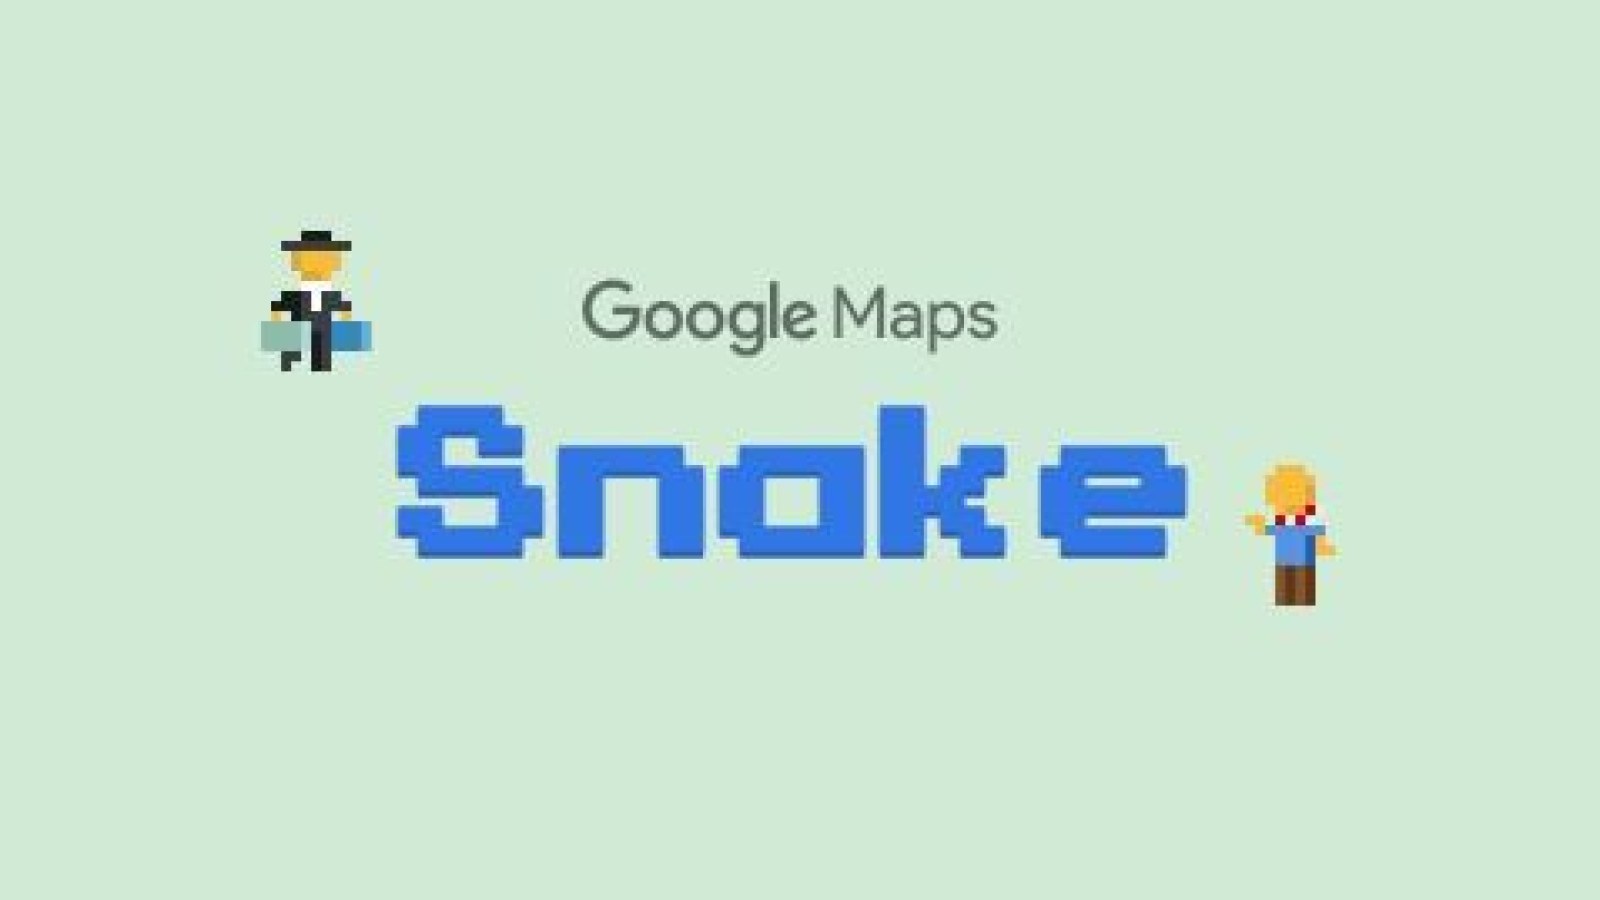 How to Play Snake in Google Maps App, Online for April Fools' Day 2019